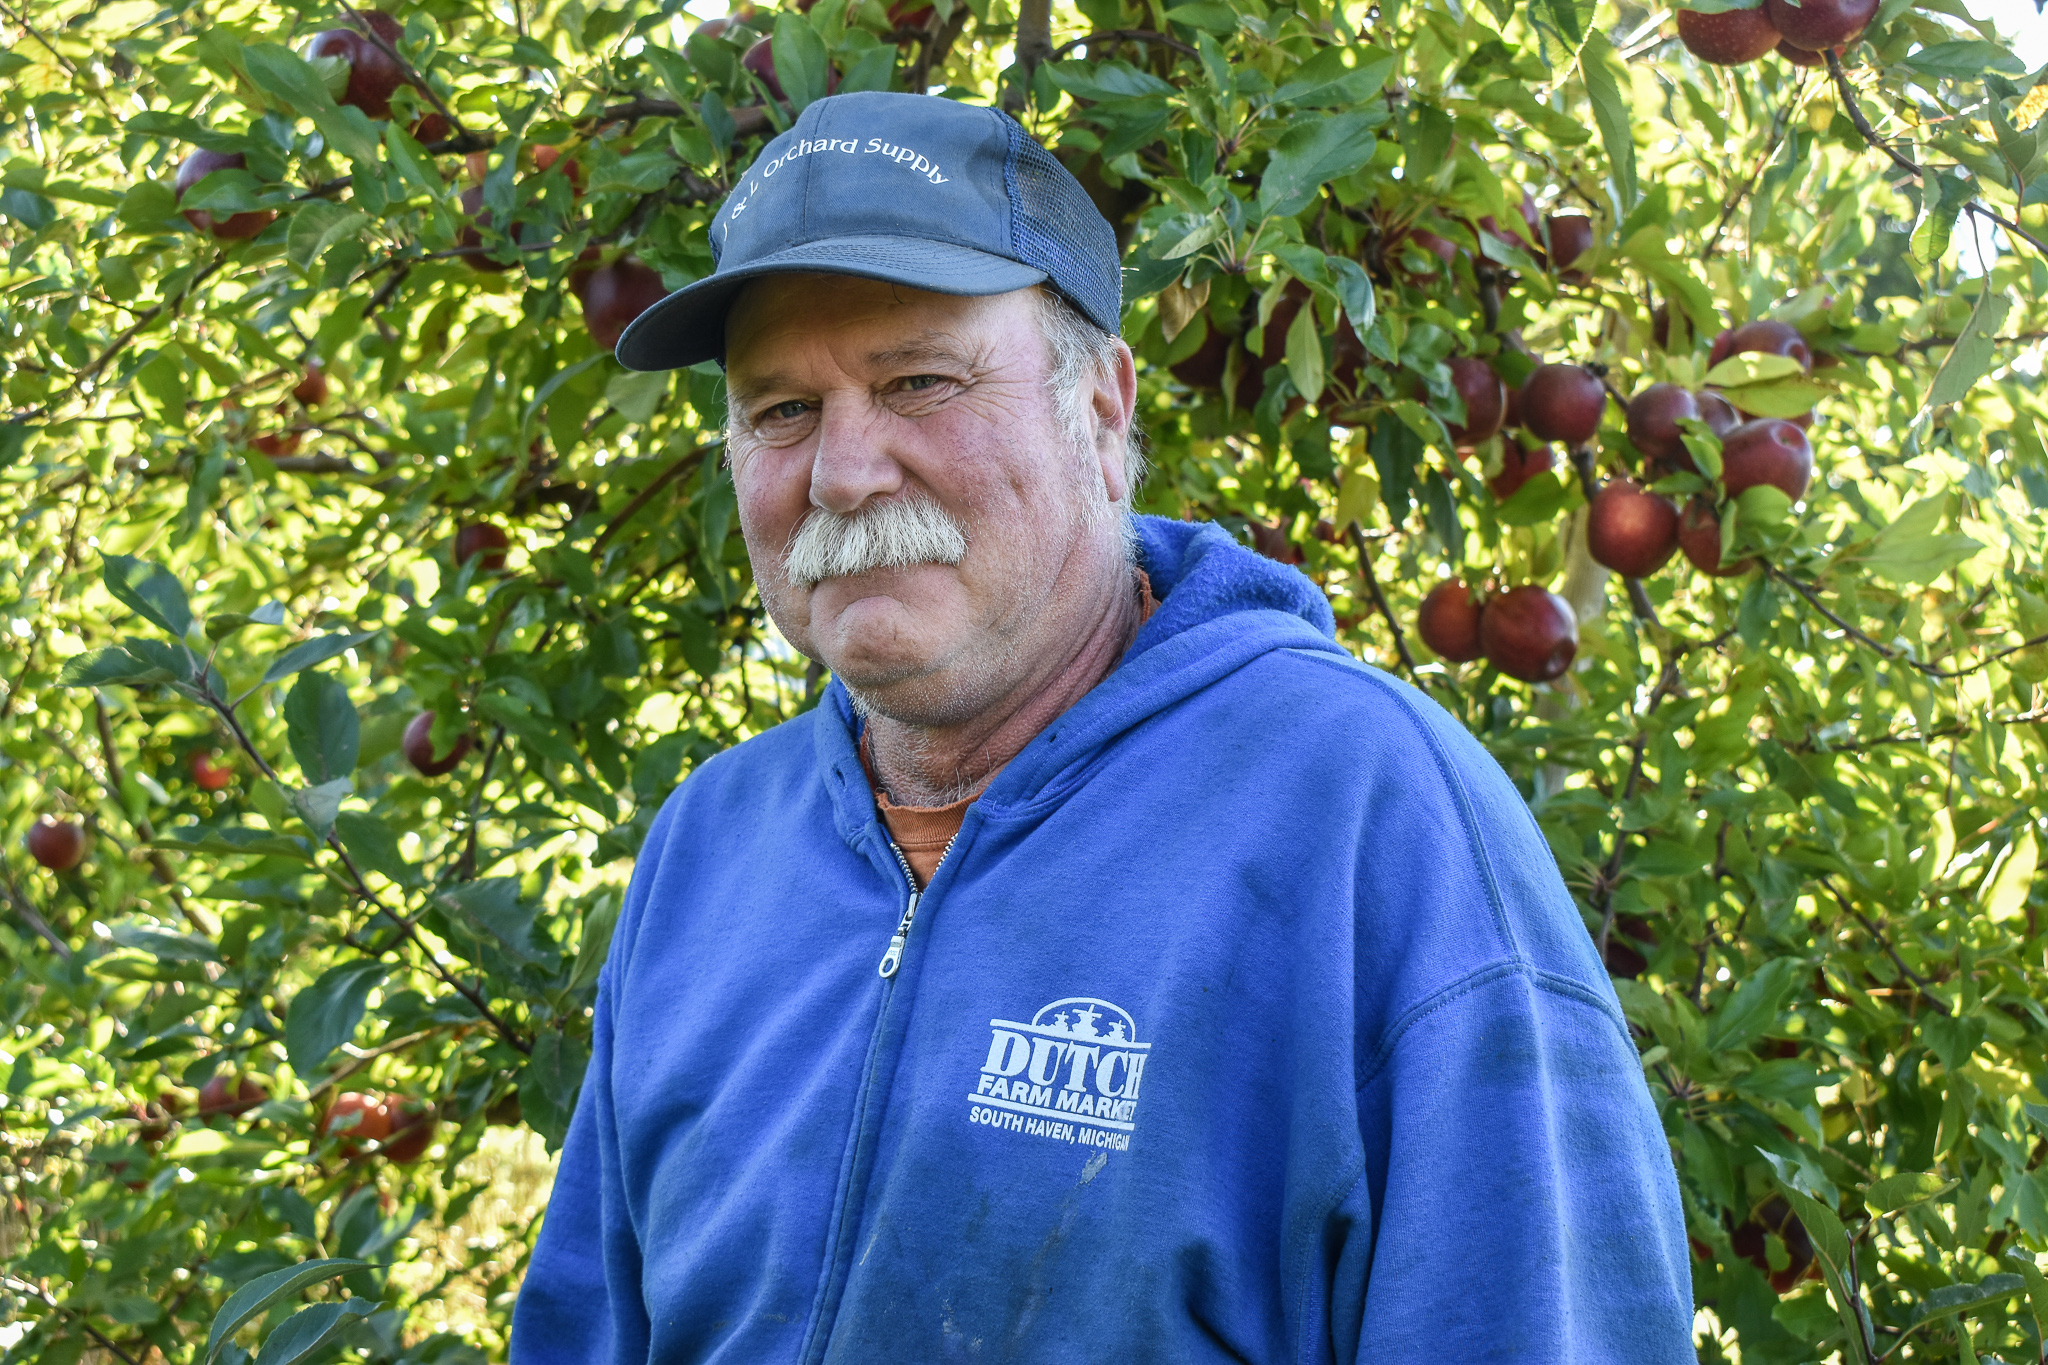 Farmer shares orchard’s surplus with neighbors in need